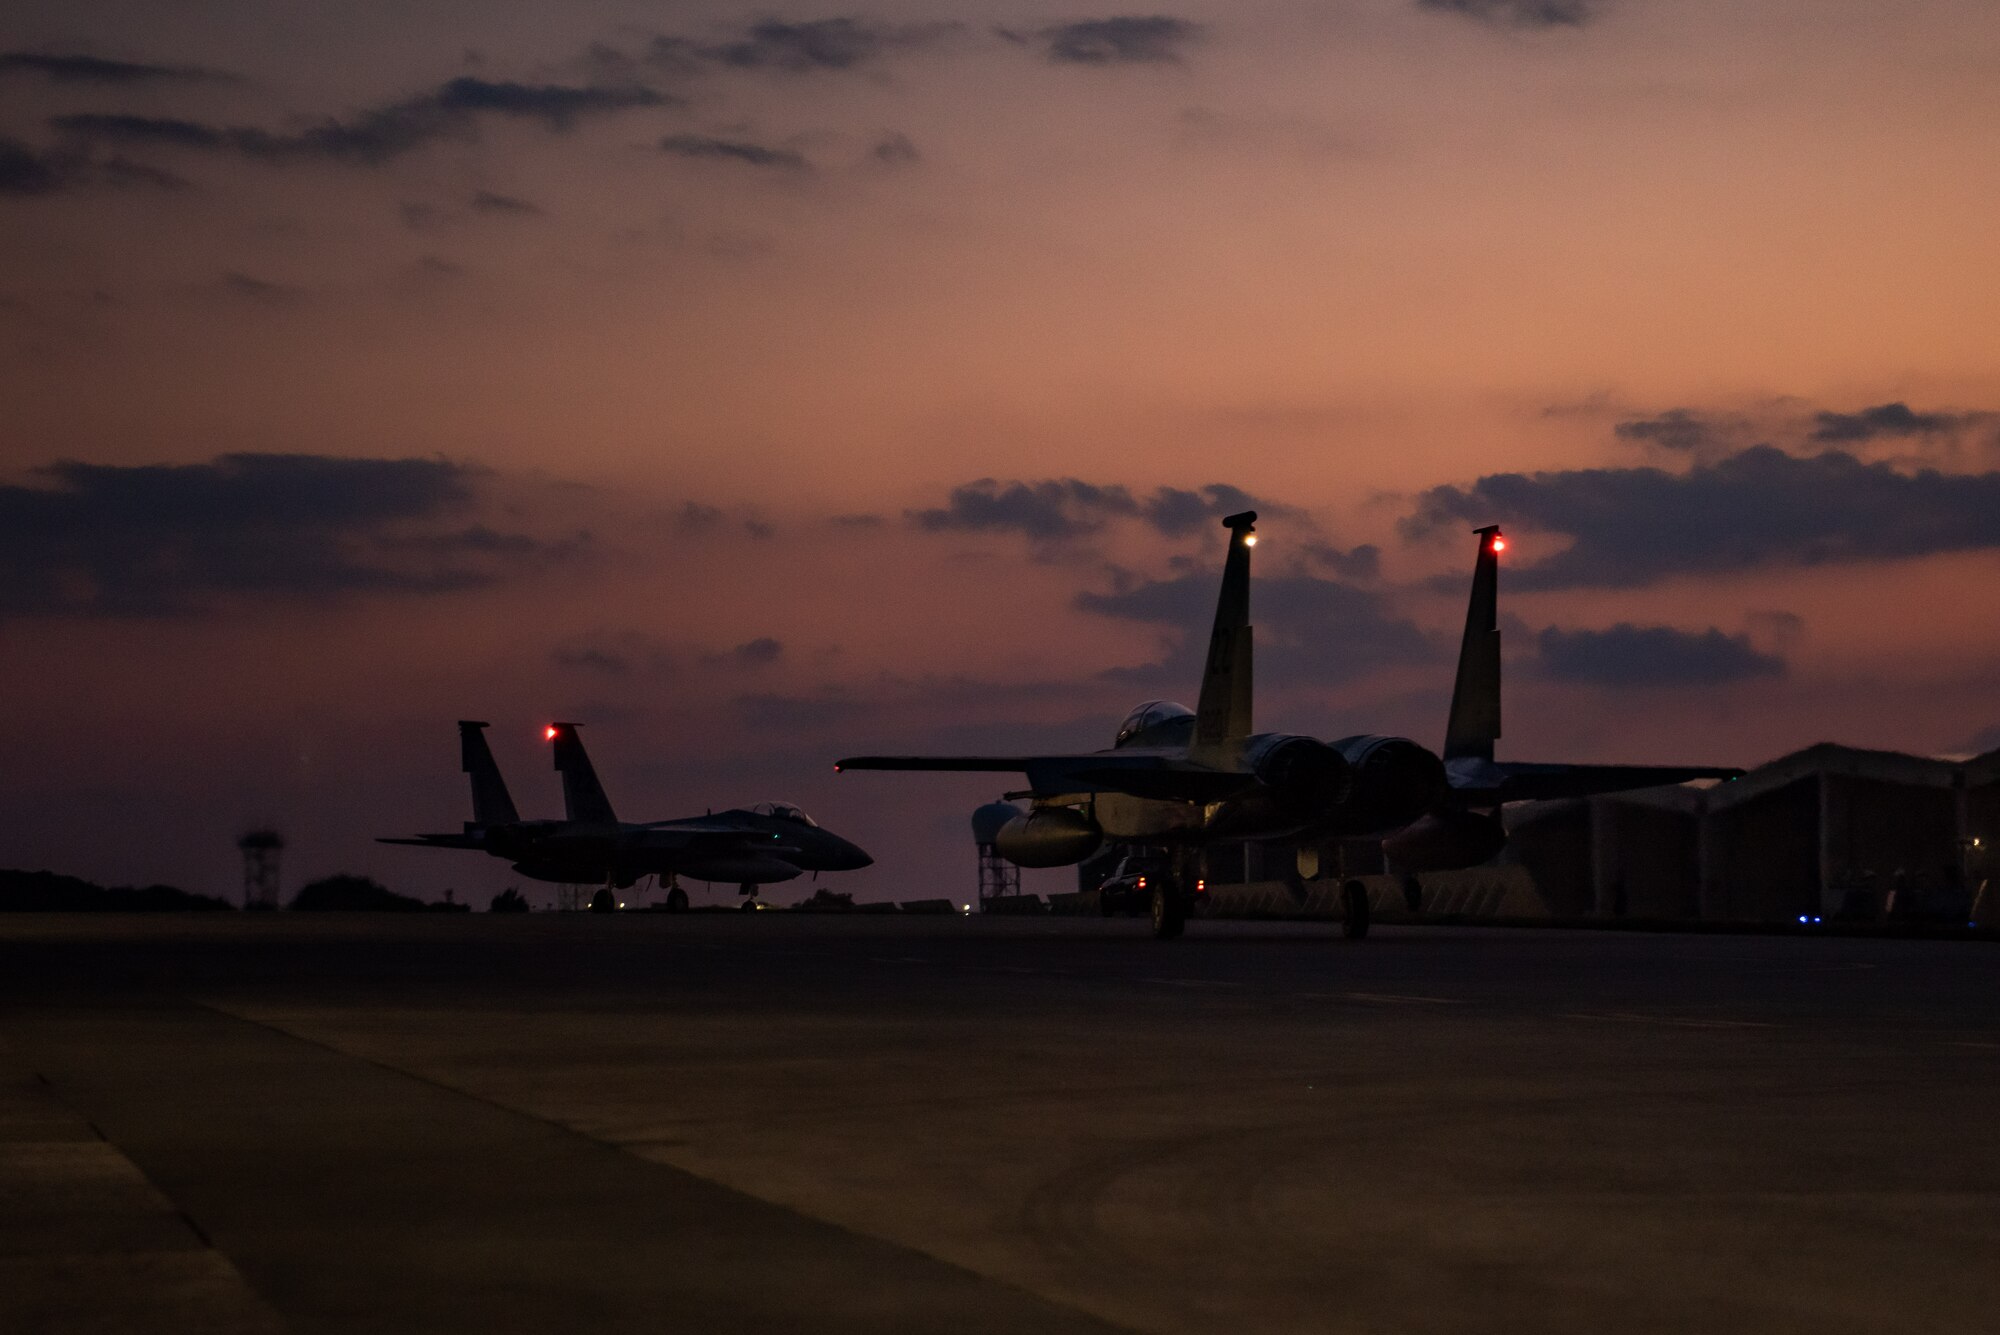 F-15C Eagles taxi on a flightline before takeoff at sunset.